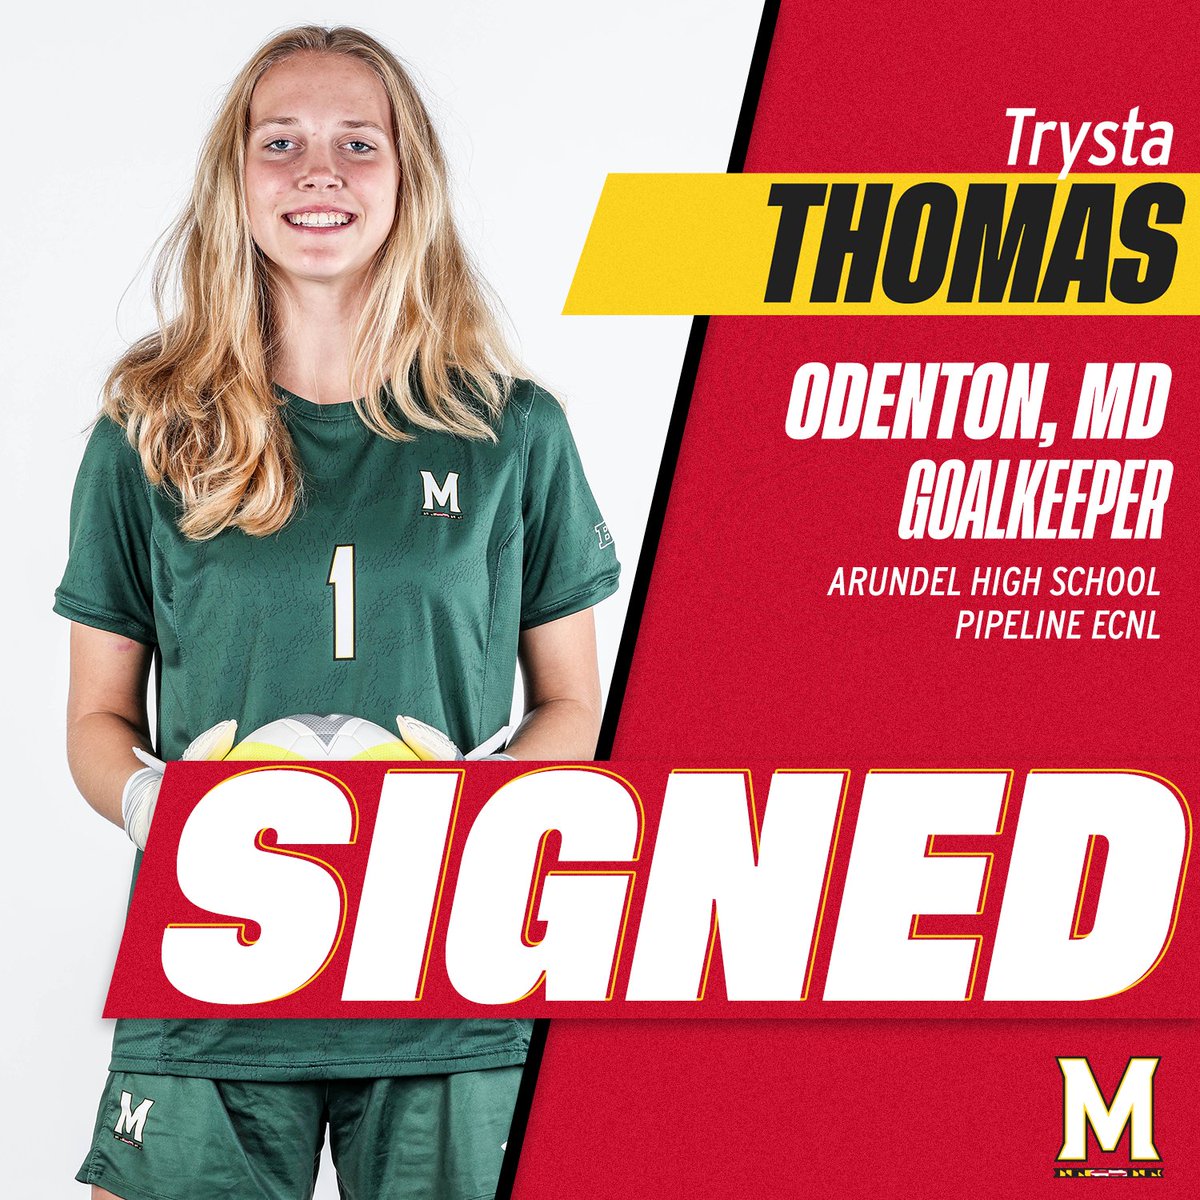 𝐖𝐞𝐥𝐜𝐨𝐦𝐞 𝐇𝐨𝐦𝐞 🐢 Trysta Thomas, an Odenton, Maryland native, joins us from Pipeline ECNL! We are so excited to have you join our family!